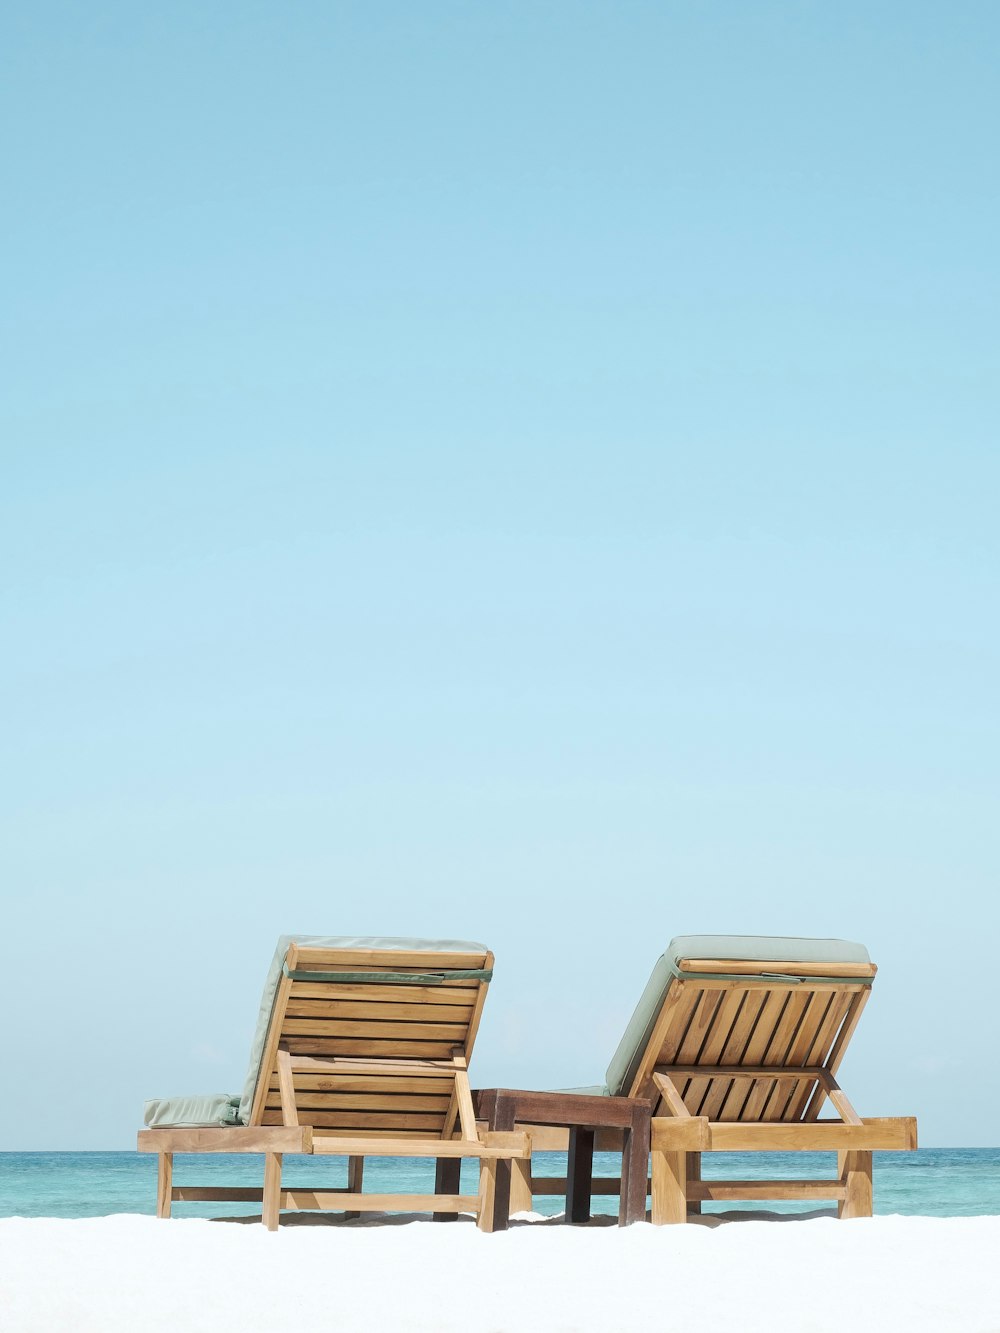 two brown wooden outdoor chaise loungers on beach